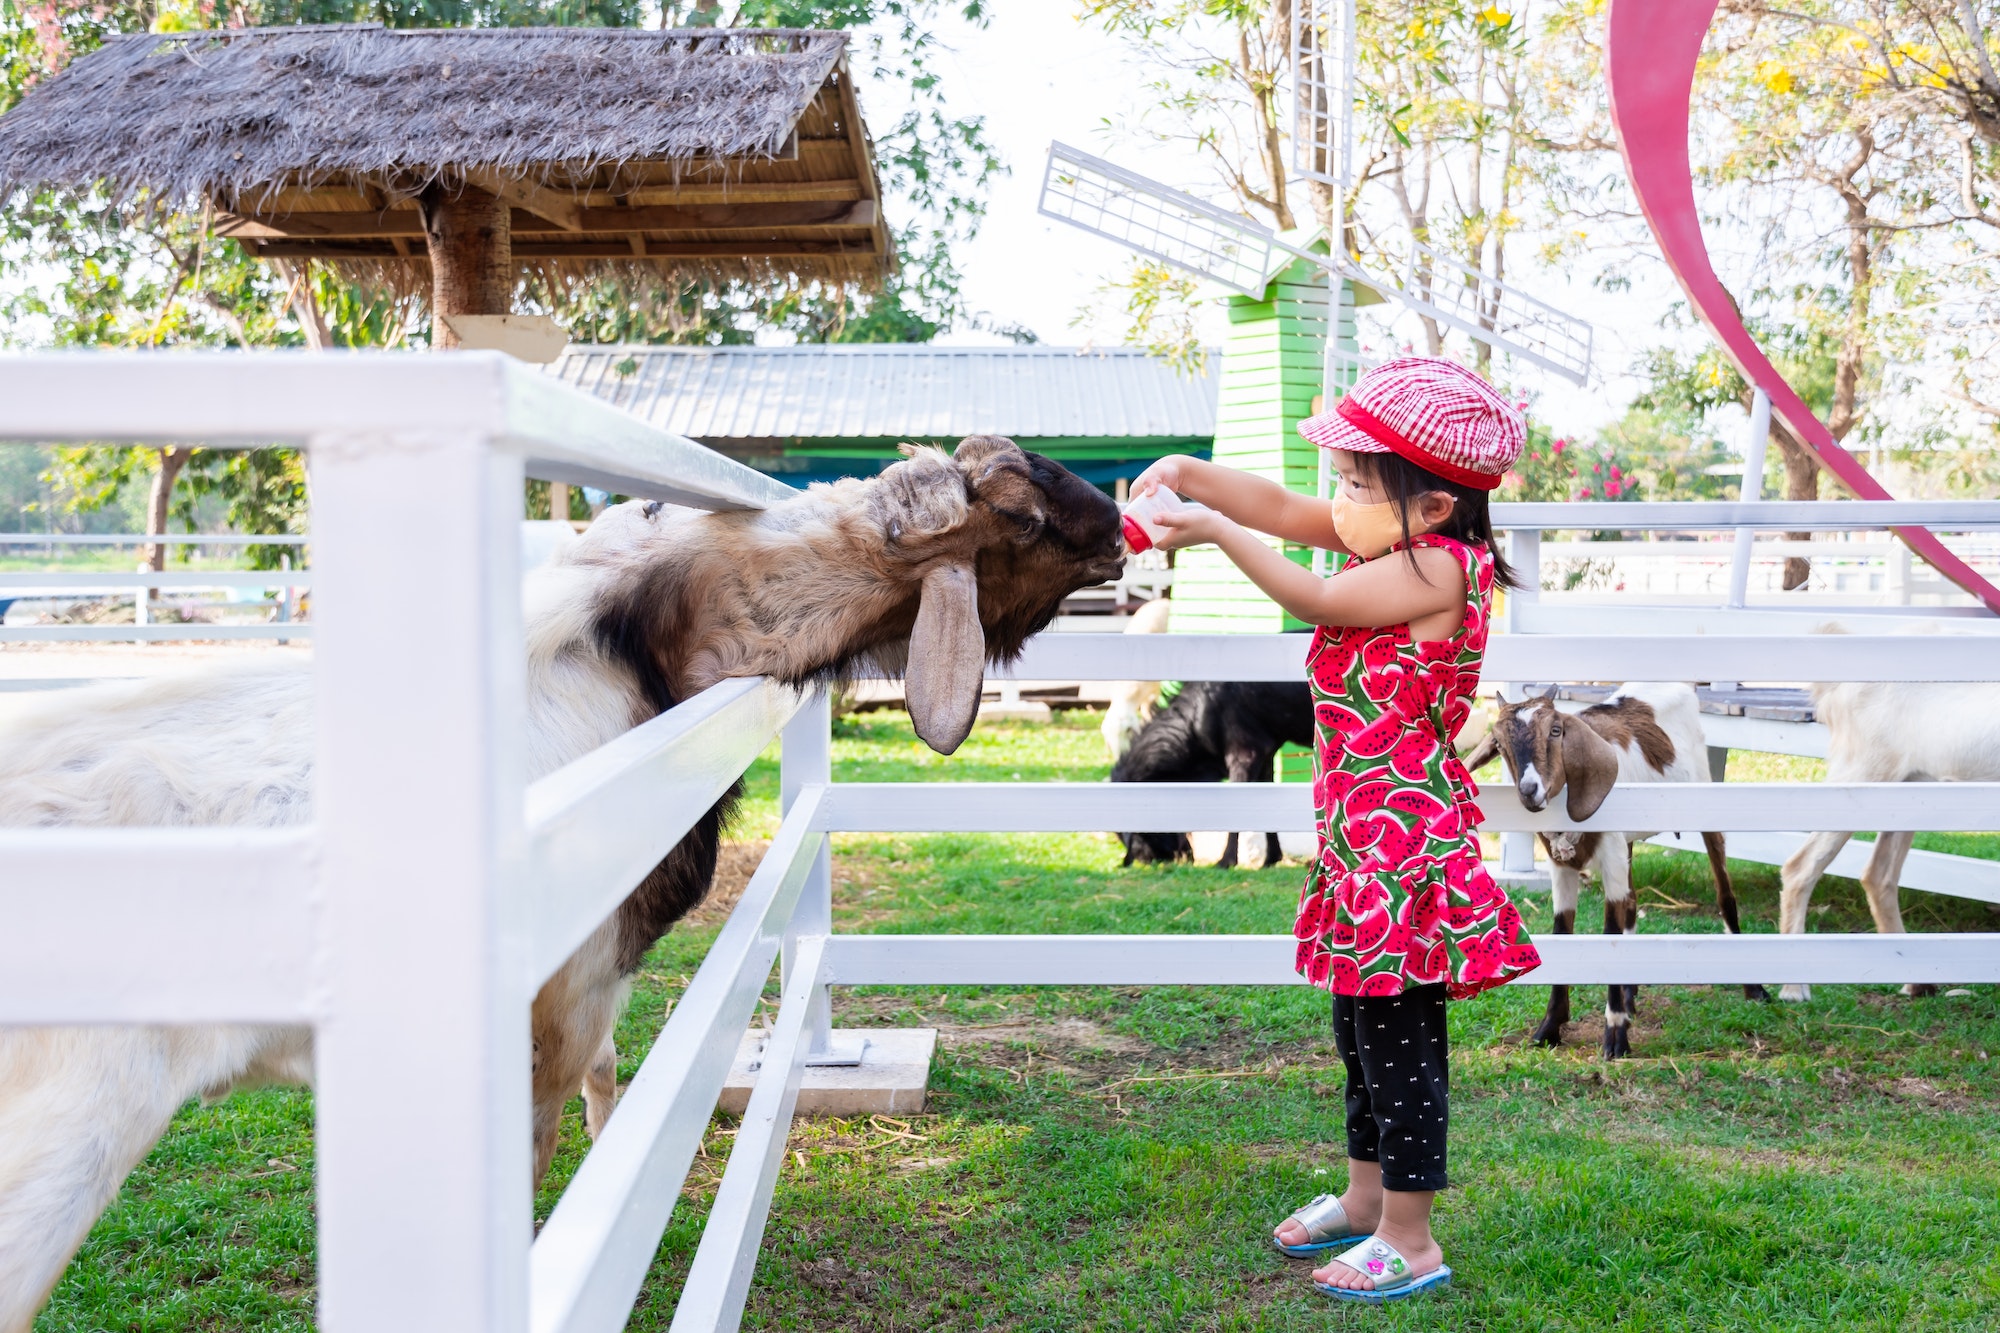 Asian girls feed the farm animals. Goat feeds from the milk bottle that the kids is holding.